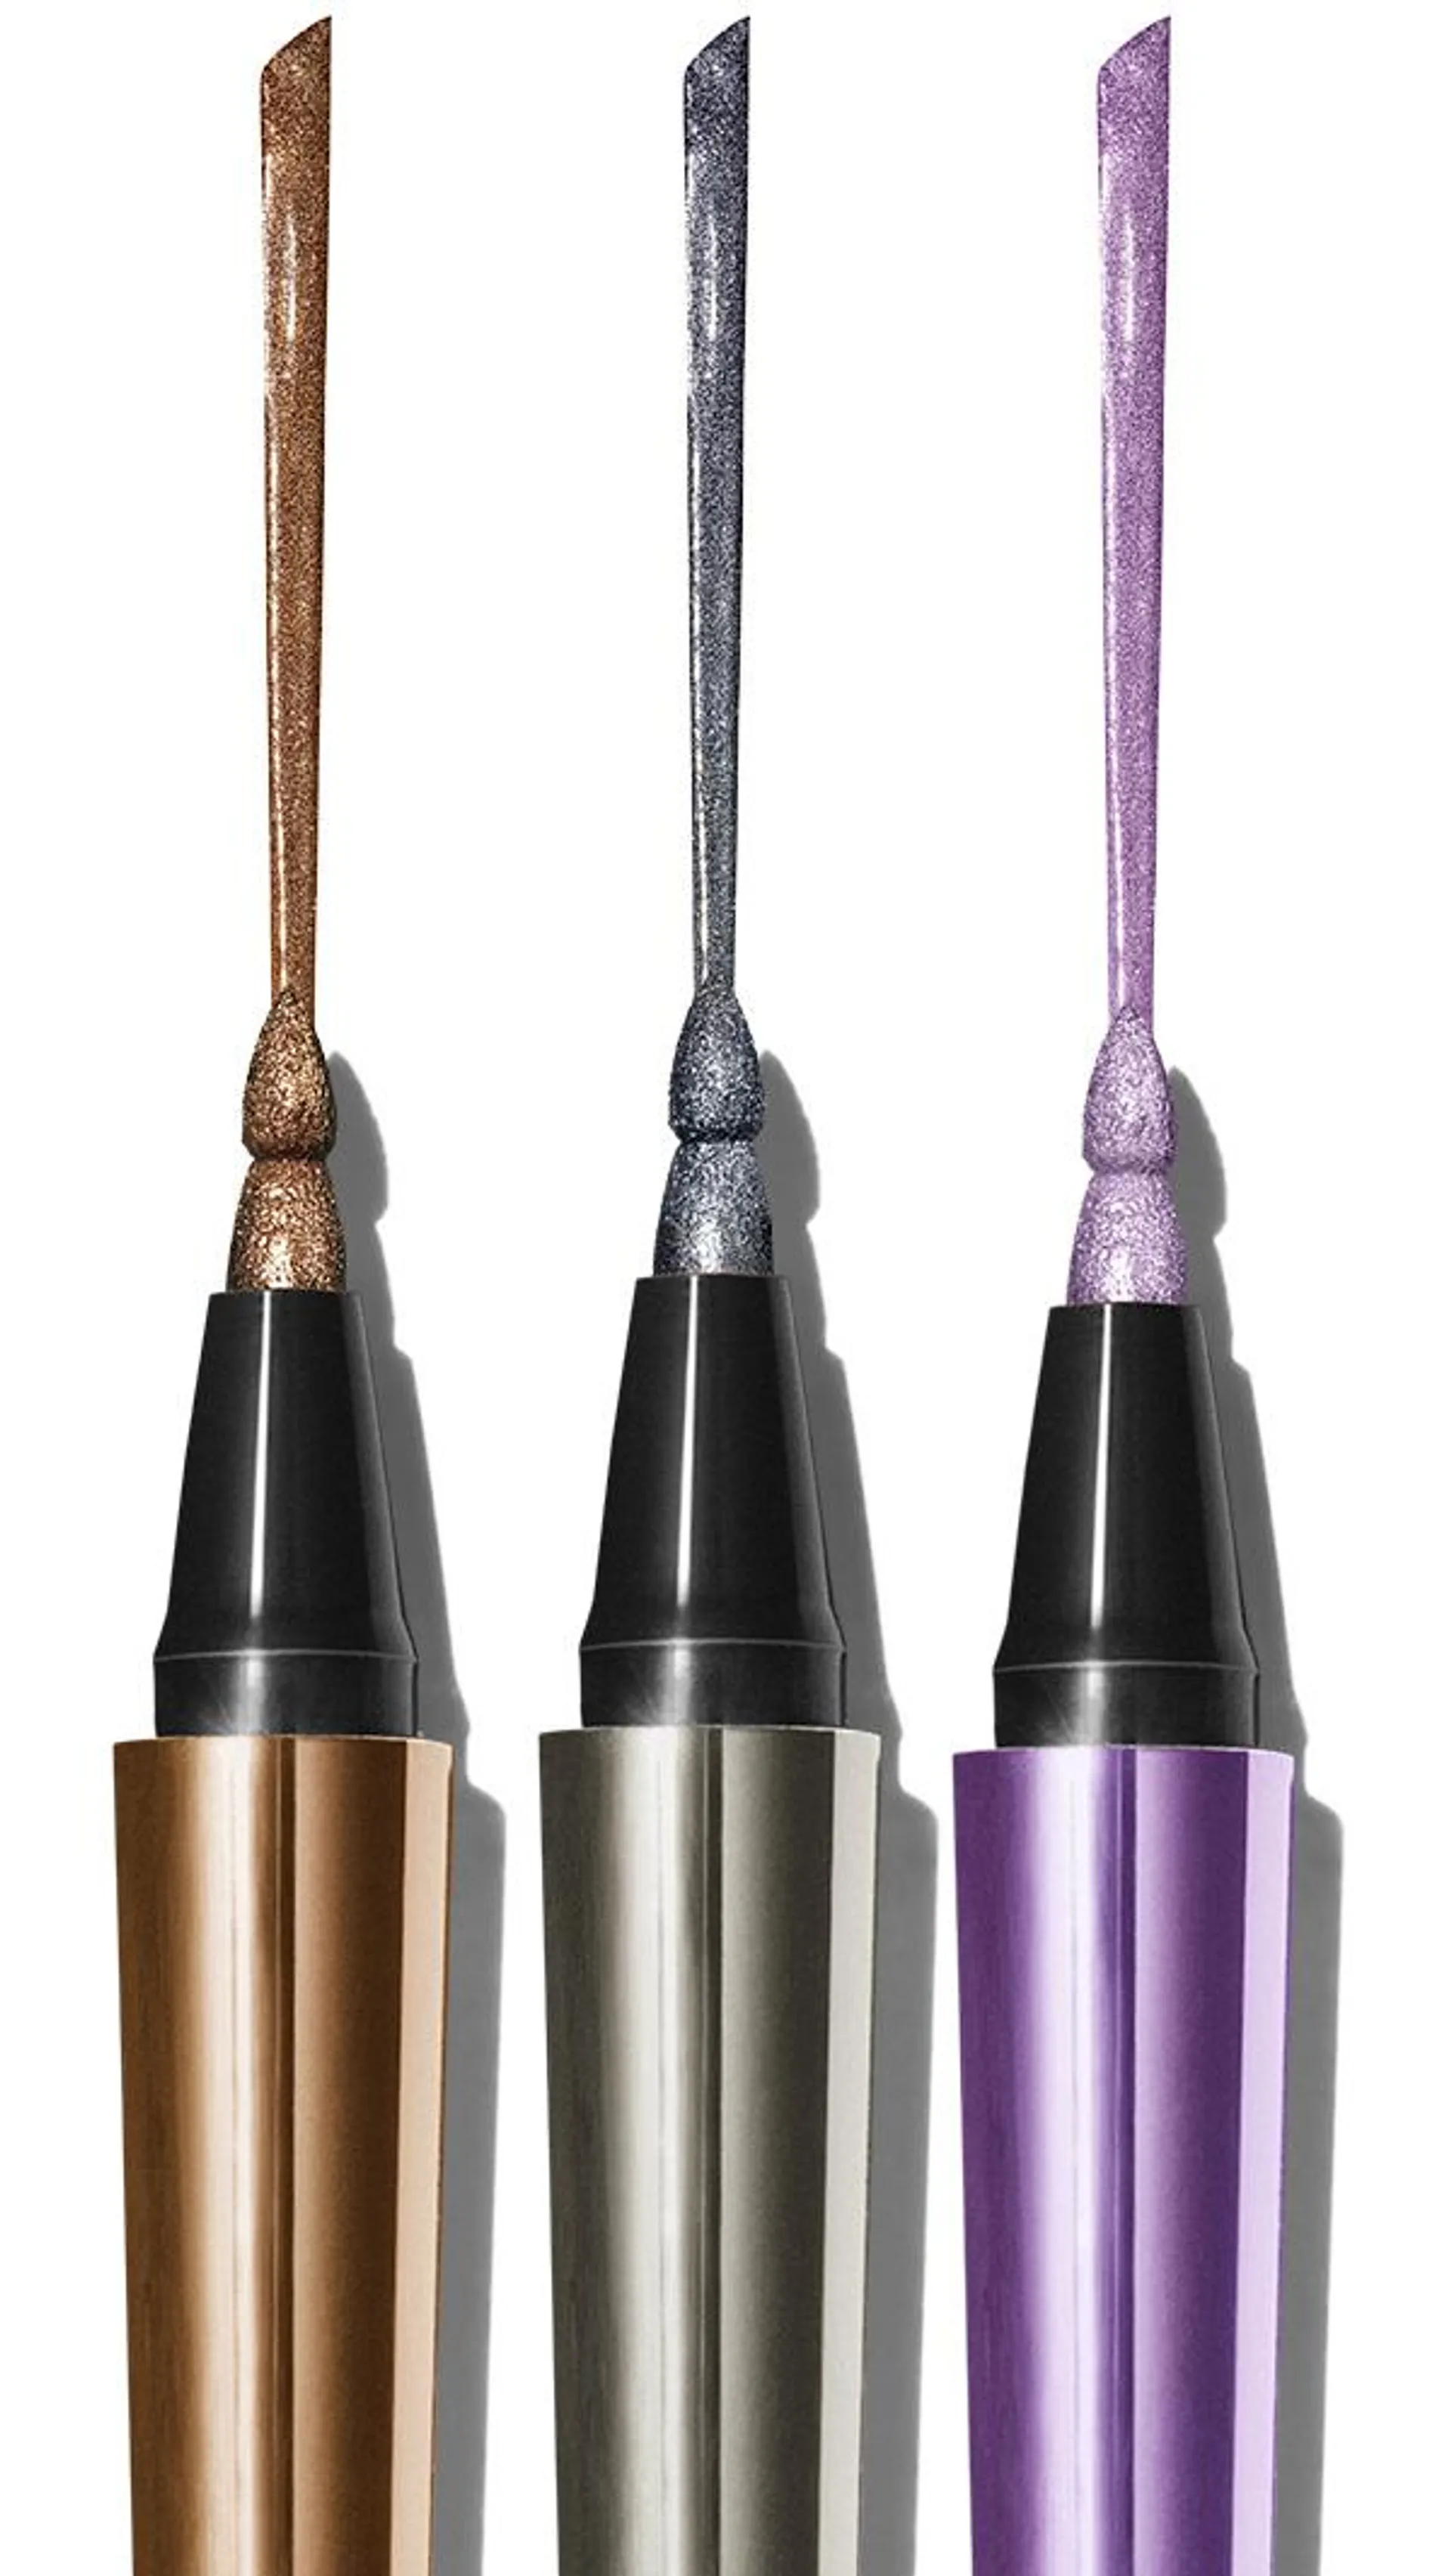 Longwearing molten metal color in an easy-to use eyeliner pen